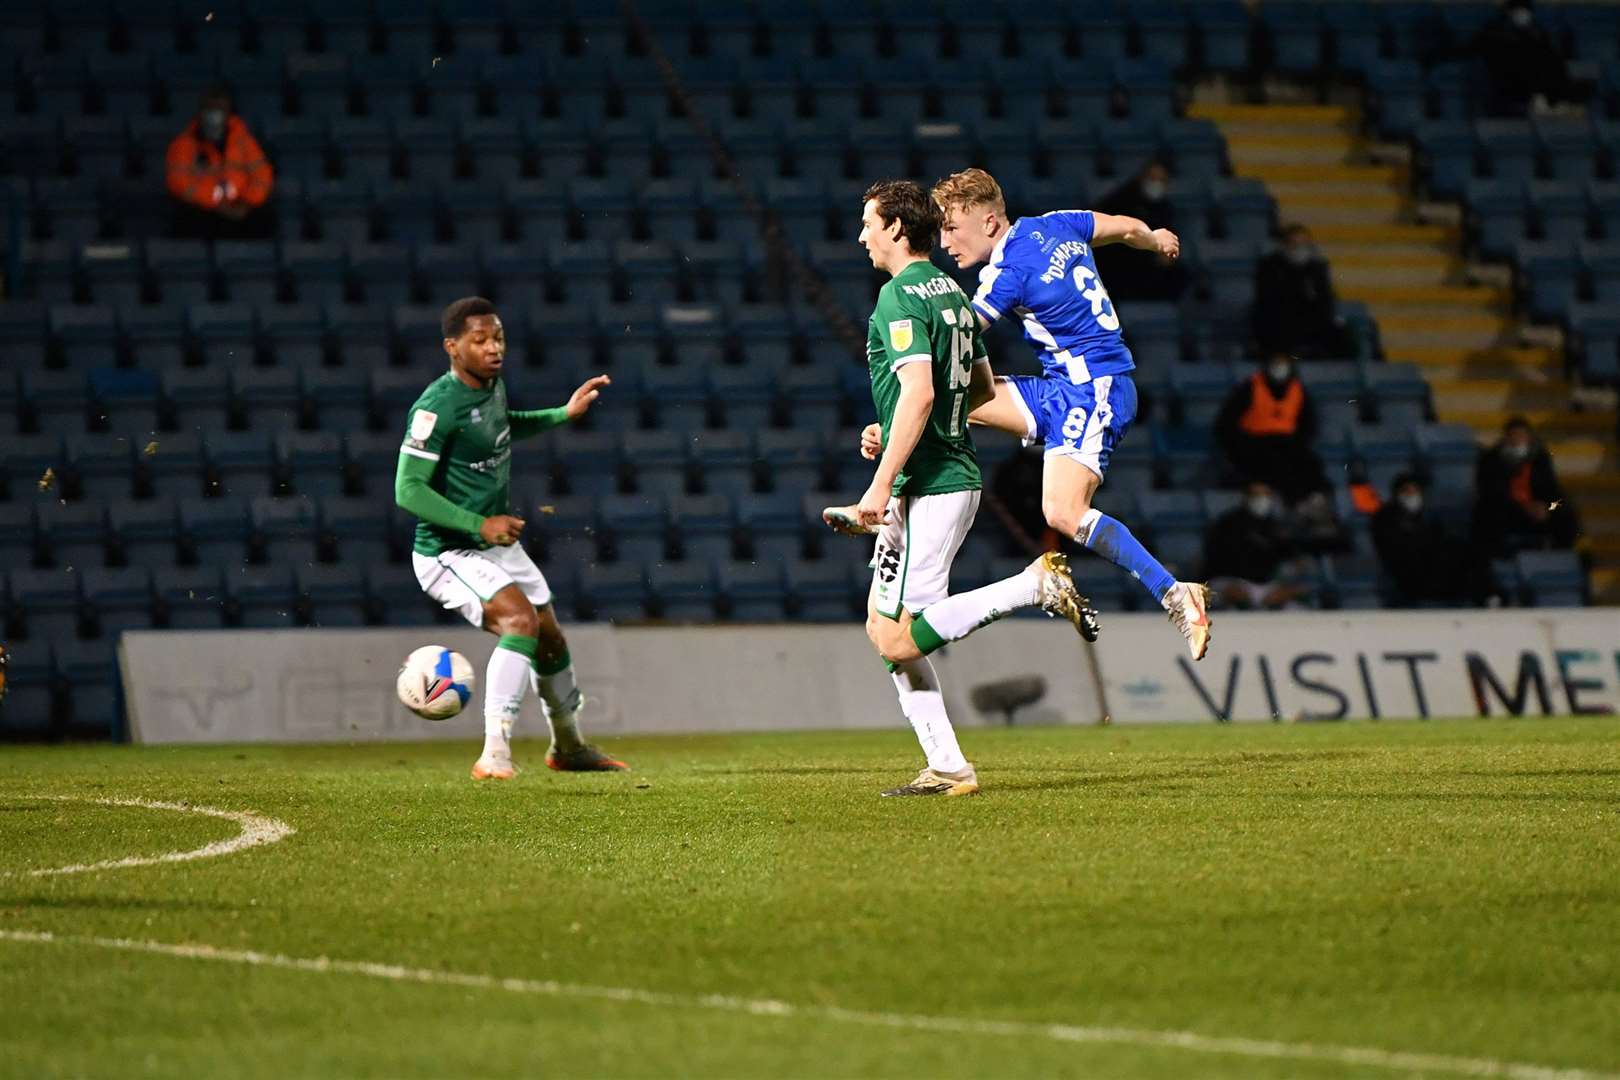 Gillingham's Kyle Dempsey has a shot at goal Picture: Keith Gillard